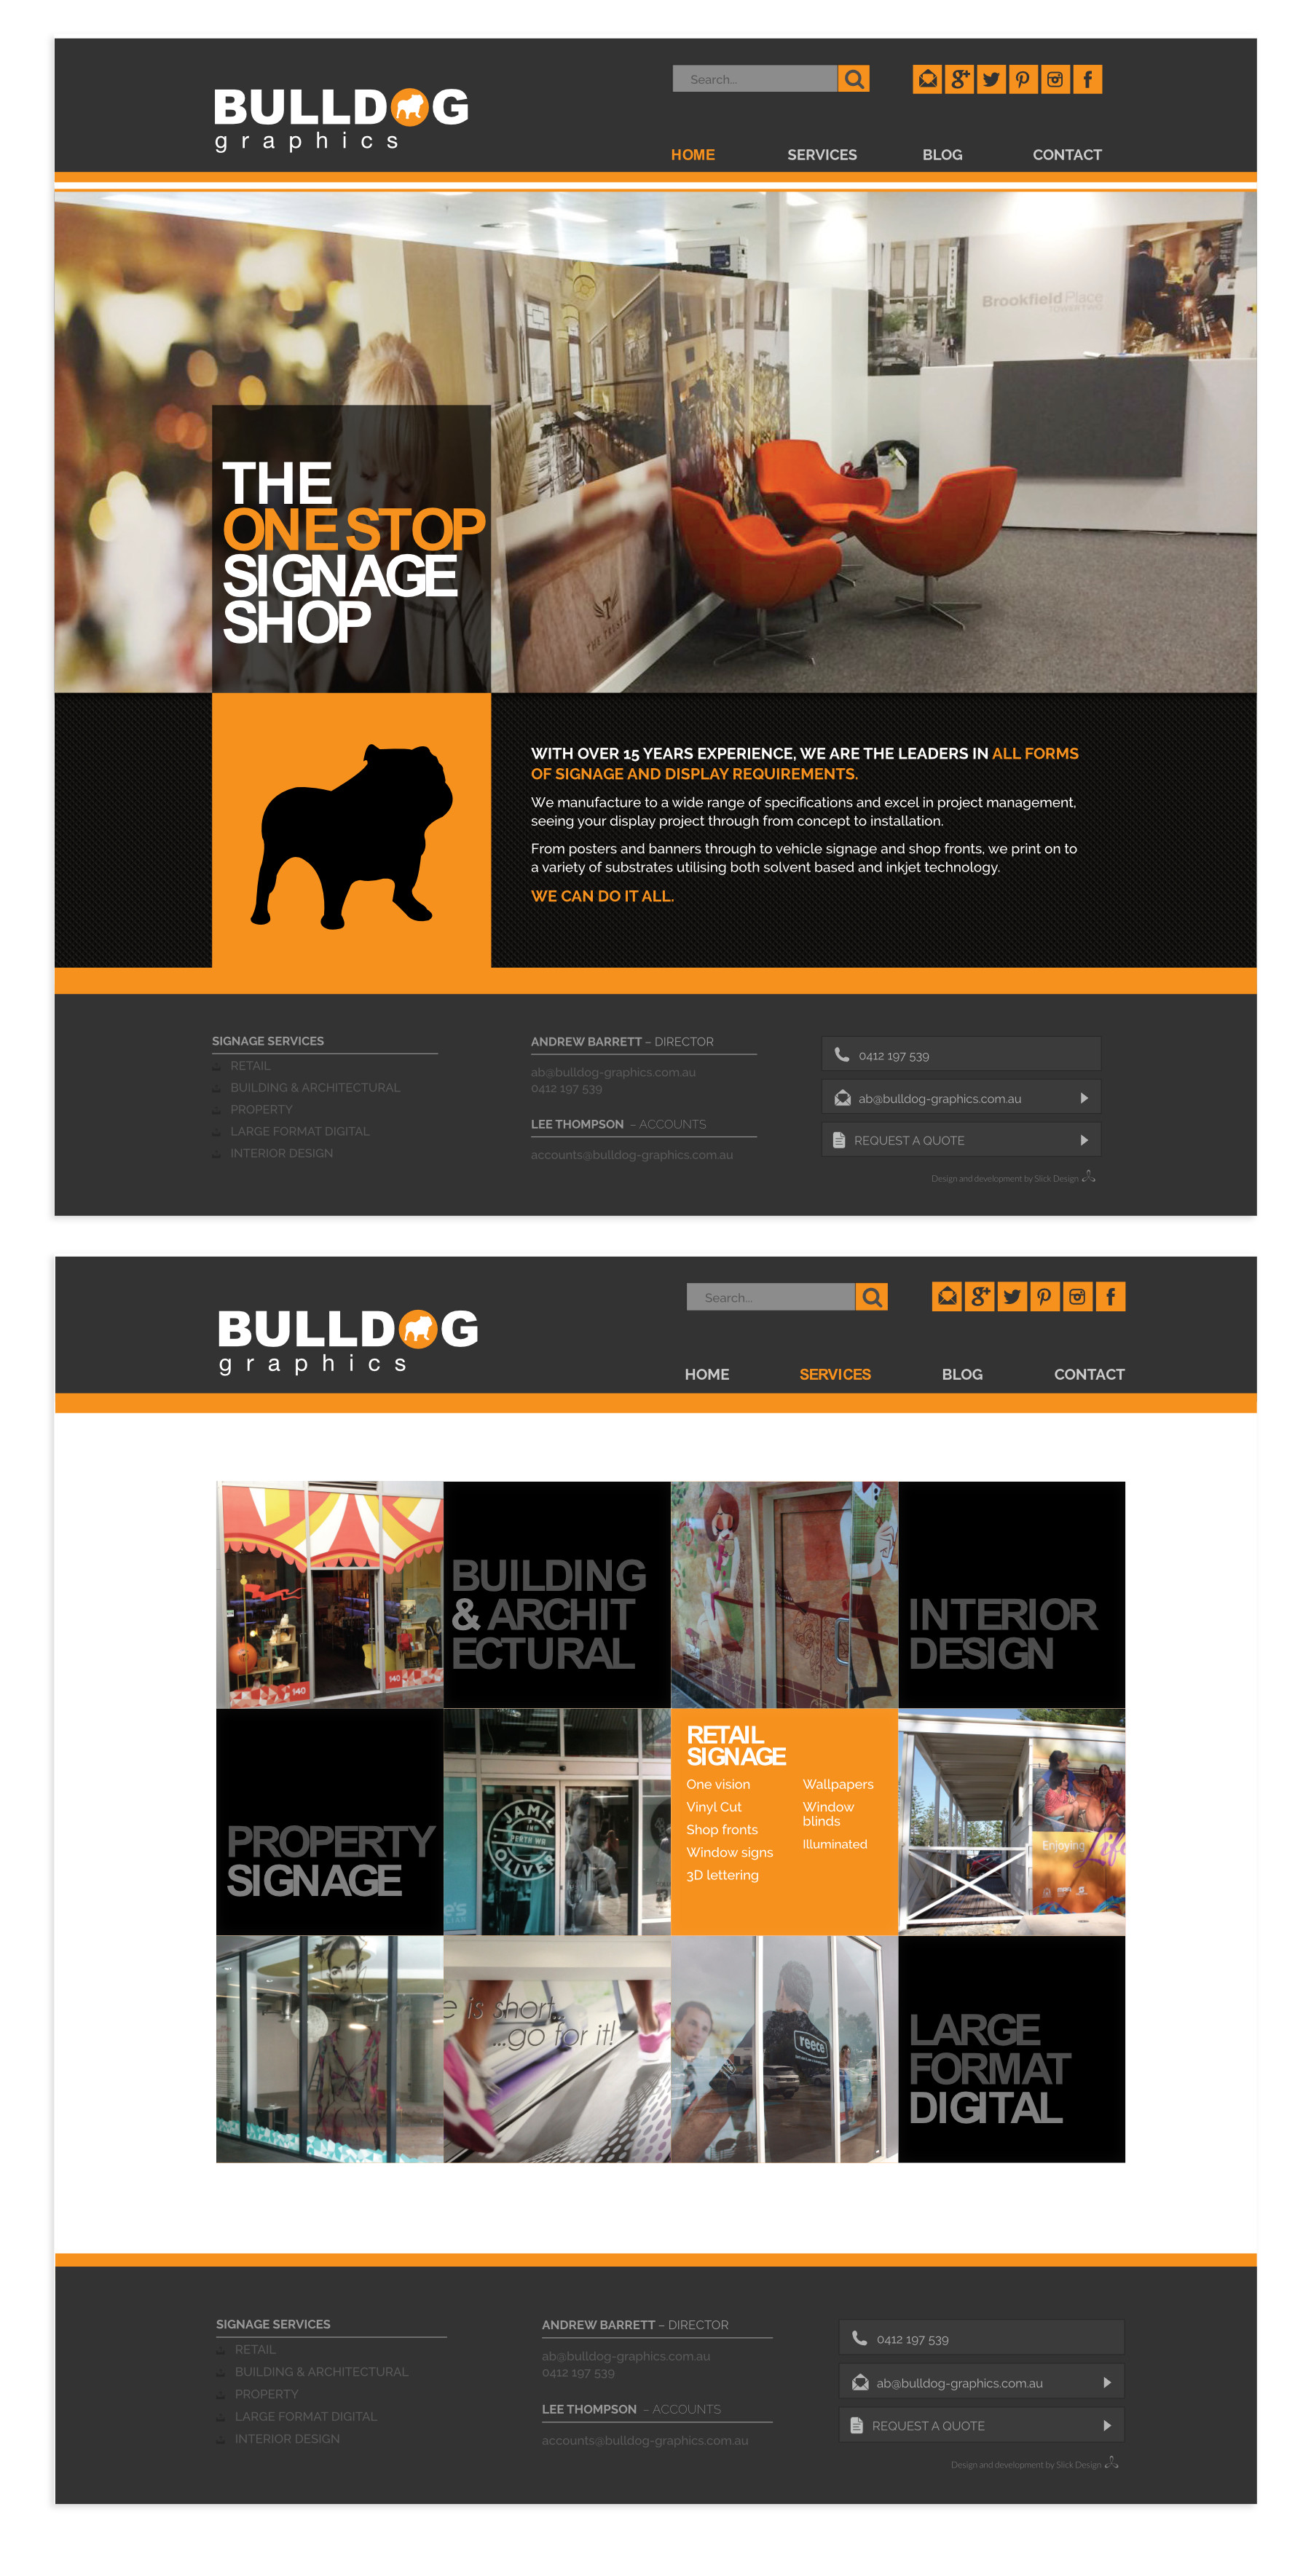 Homepage and services page designs for Bulldog Graphics by Charlotte Clark